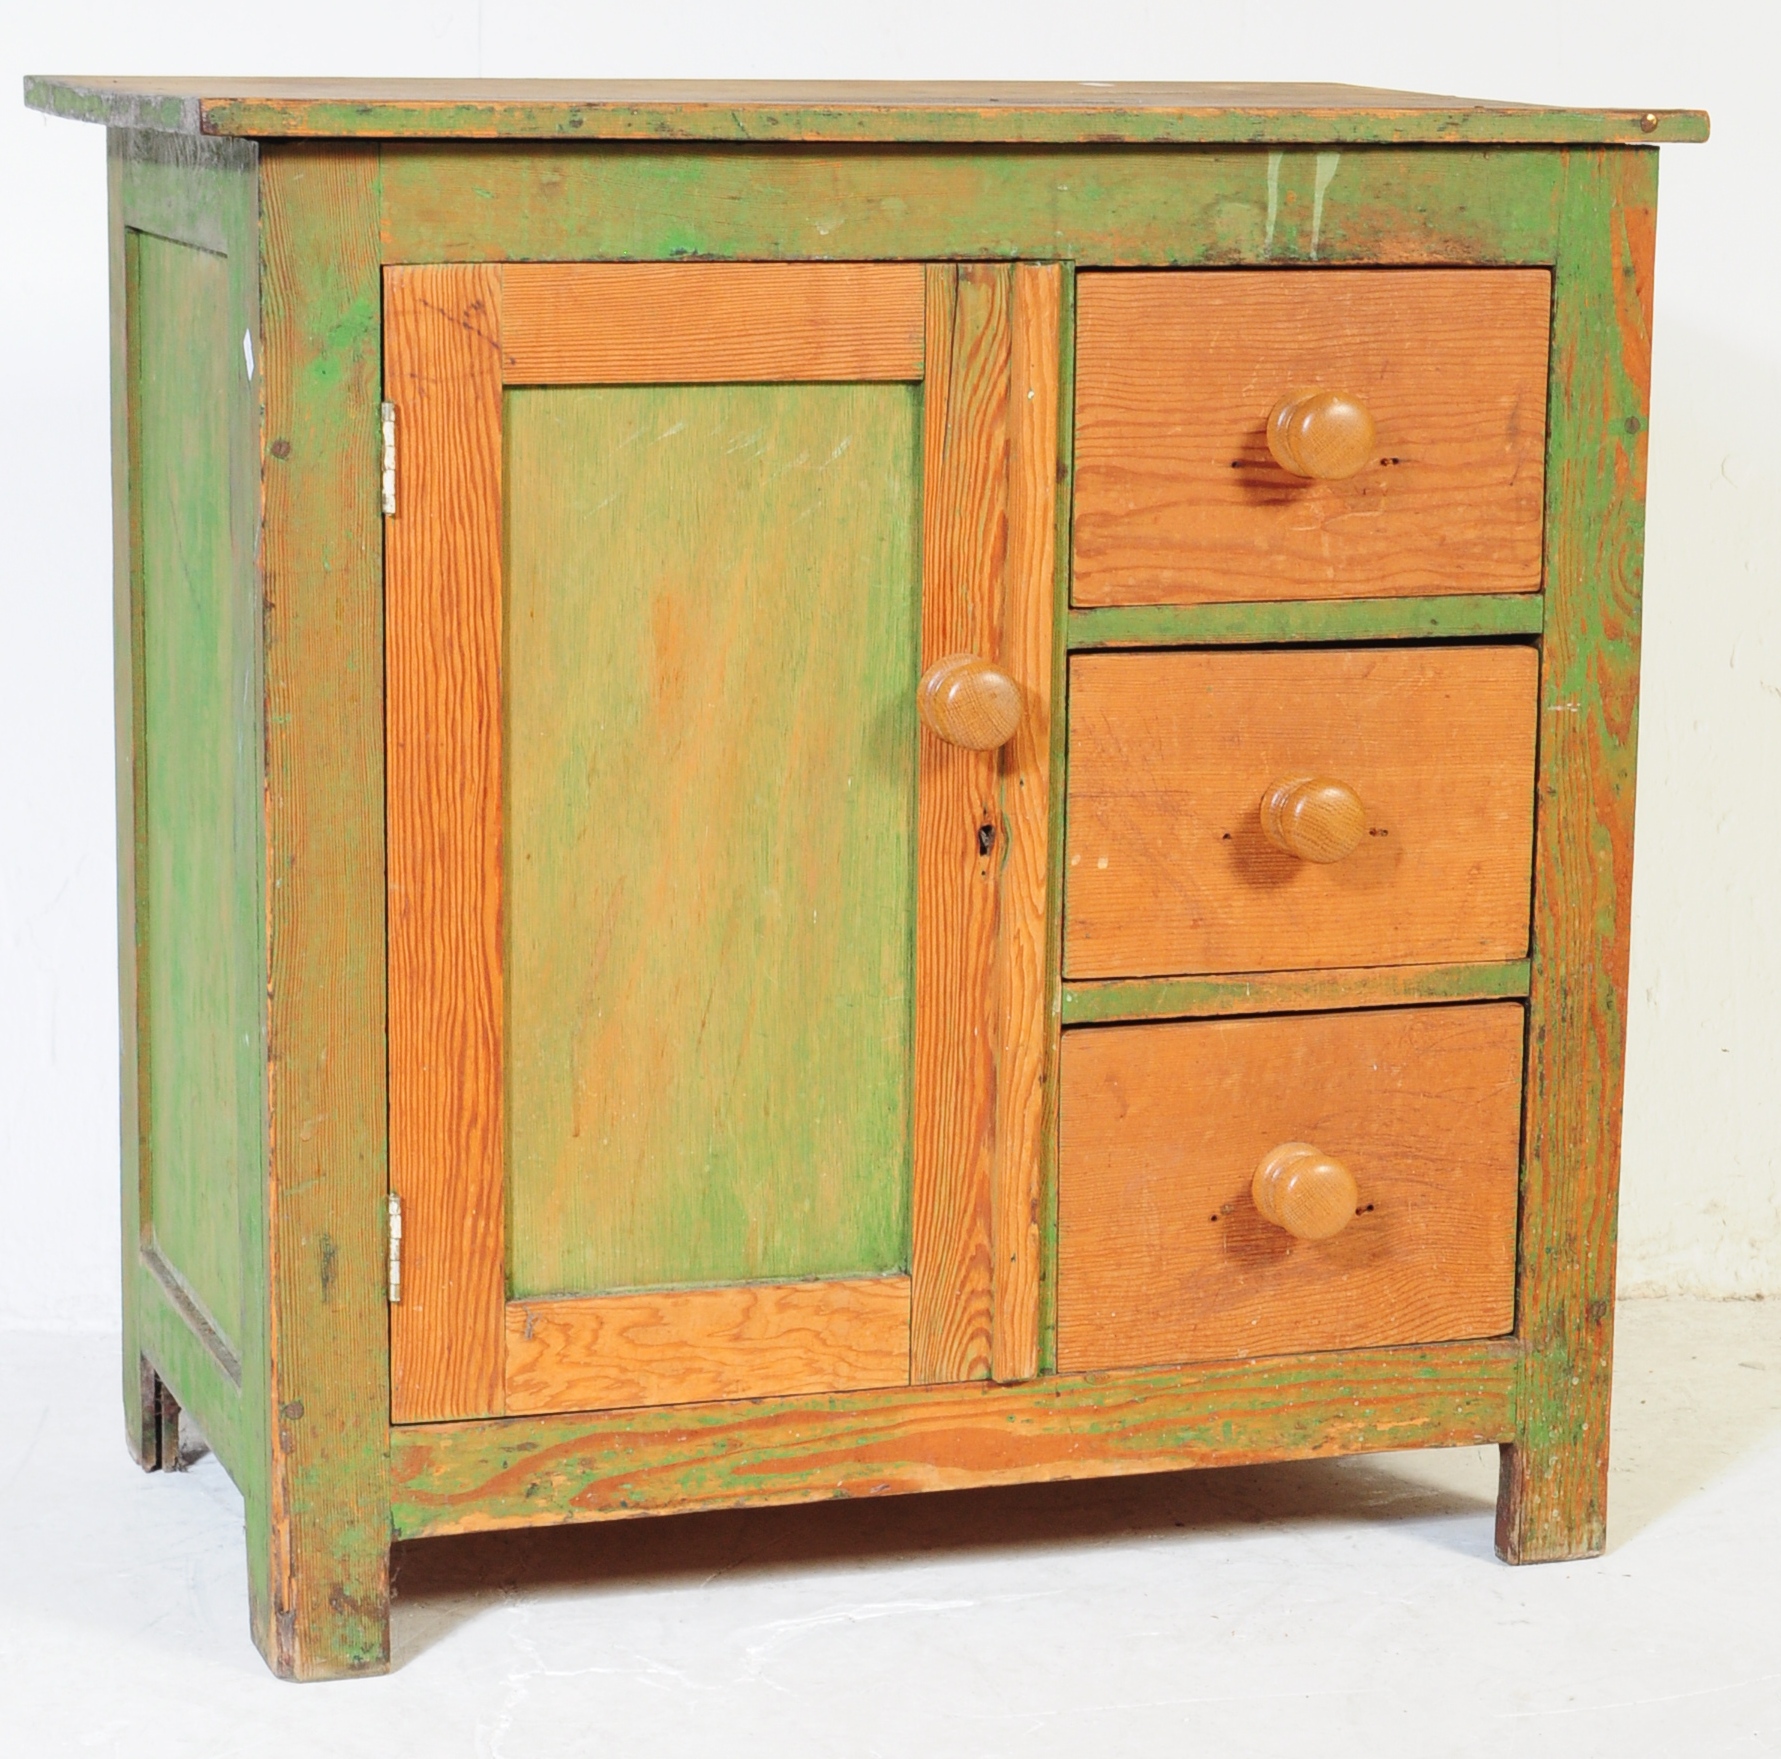 19TH CENTURY COUNTRY PAINTED PINE LINEN CUPBOARD CHEST